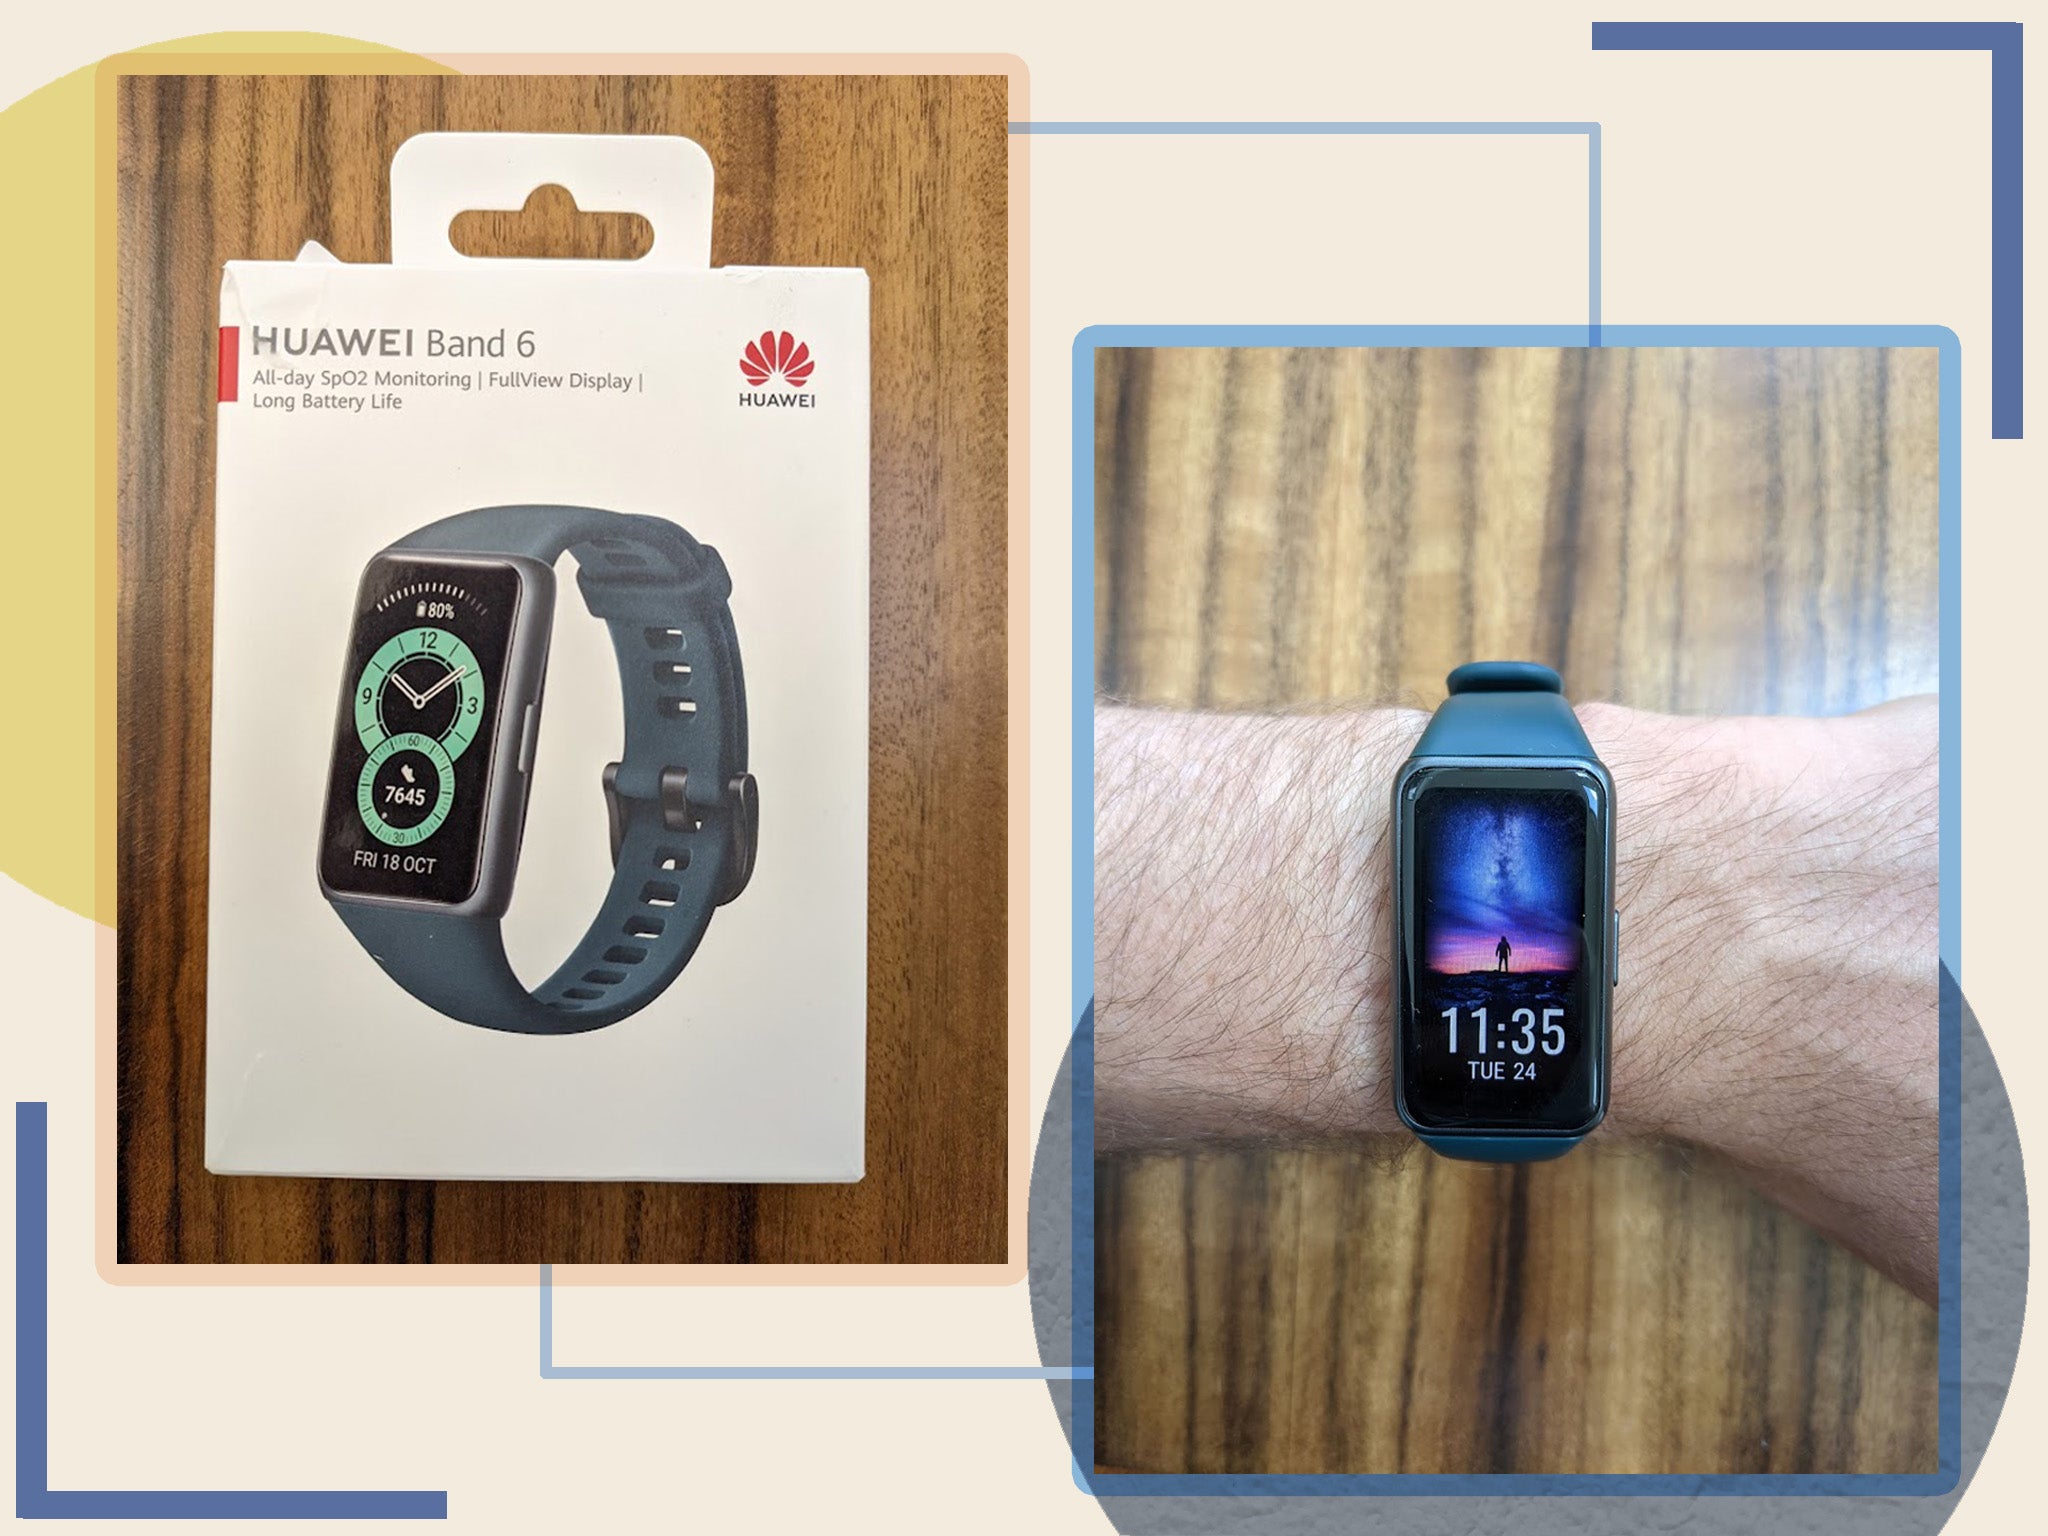 Top 5 Reasons Why Huawei Band 8 is the Must-Have Smart Band of